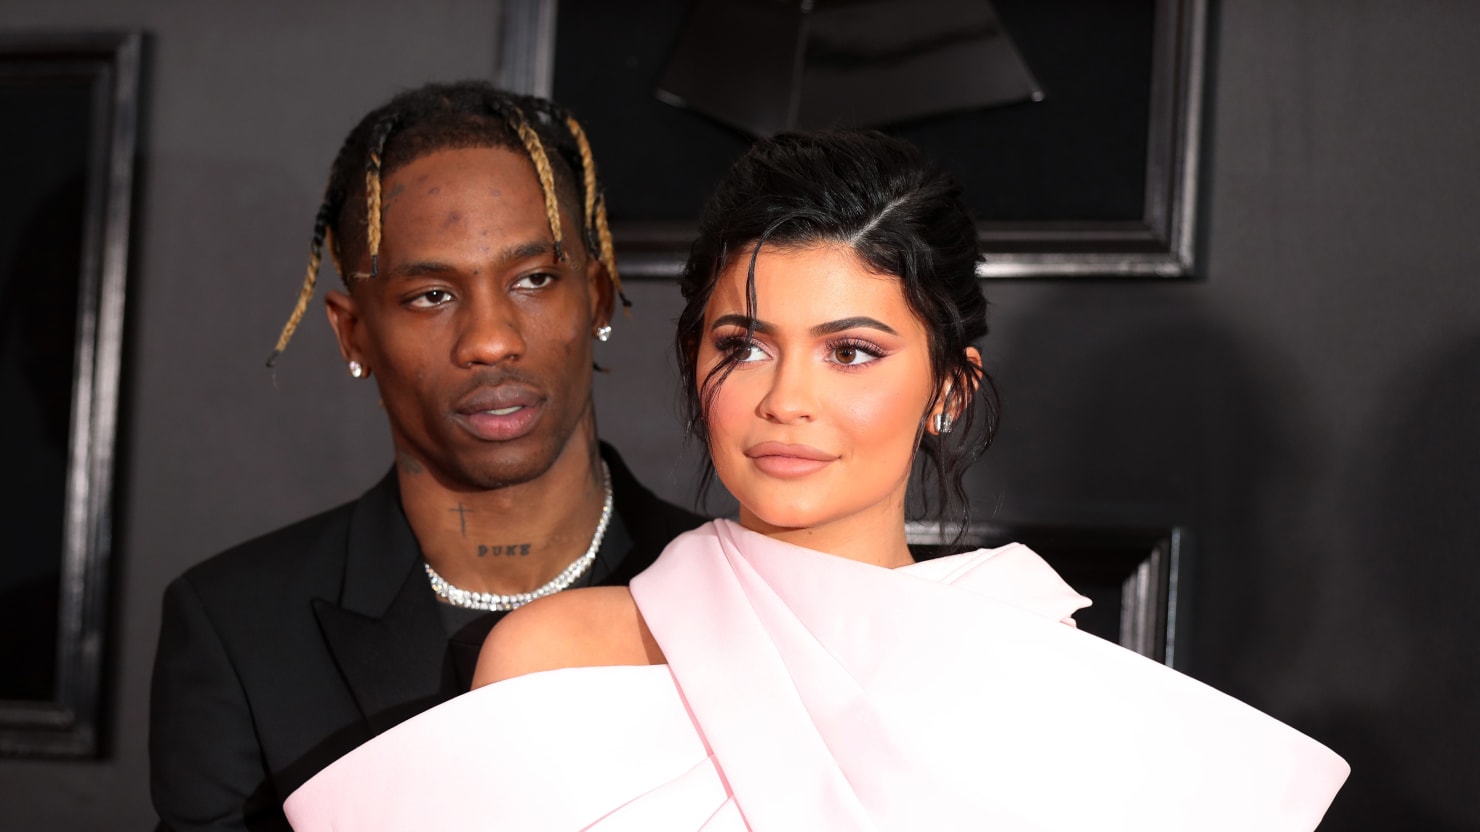 Kylie Jenner has finally explained the logic behind her (bonkers